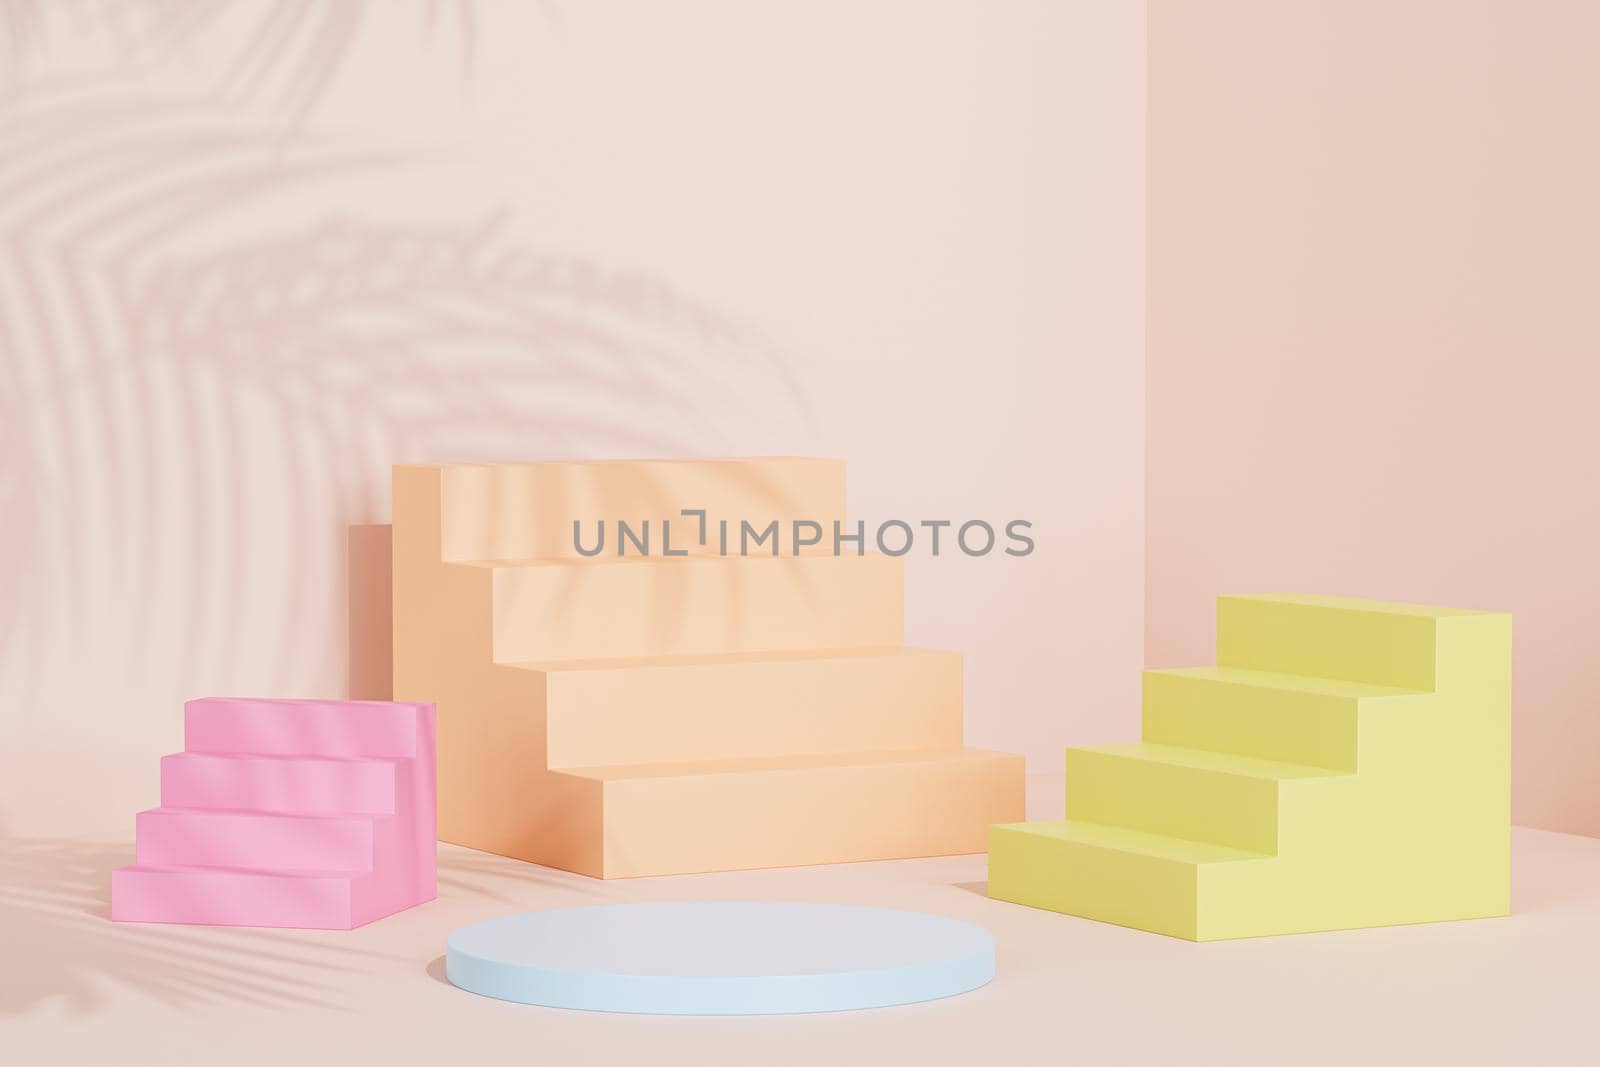 Podium or pedestal with stairs for products or advertising on pastel beige background with tropical leaf shadow, 3d illustration render by Frostroomhead